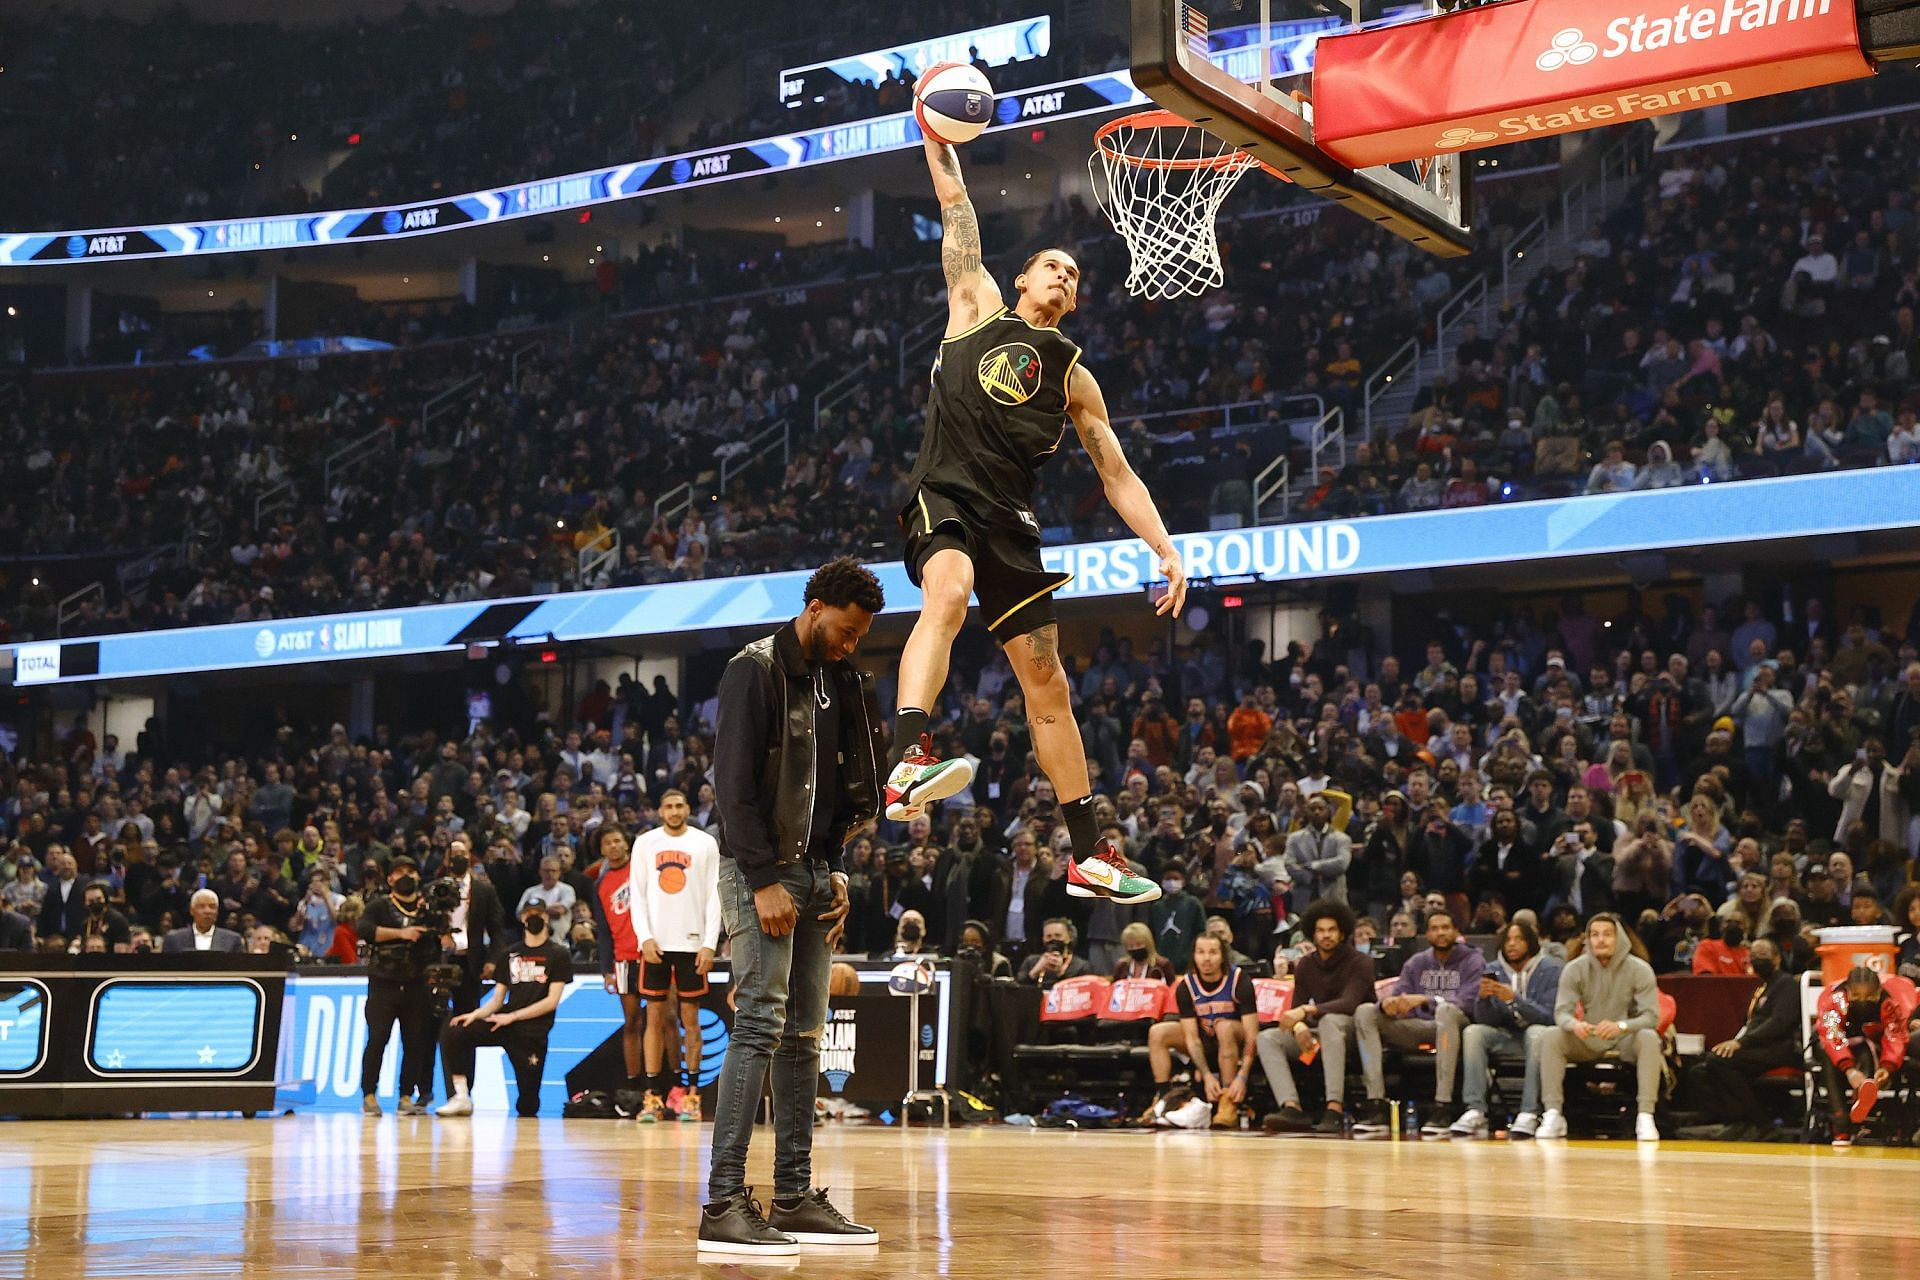 The 2022 All-Star - AT&amp;T Slam Dunk competition had more misses than hits